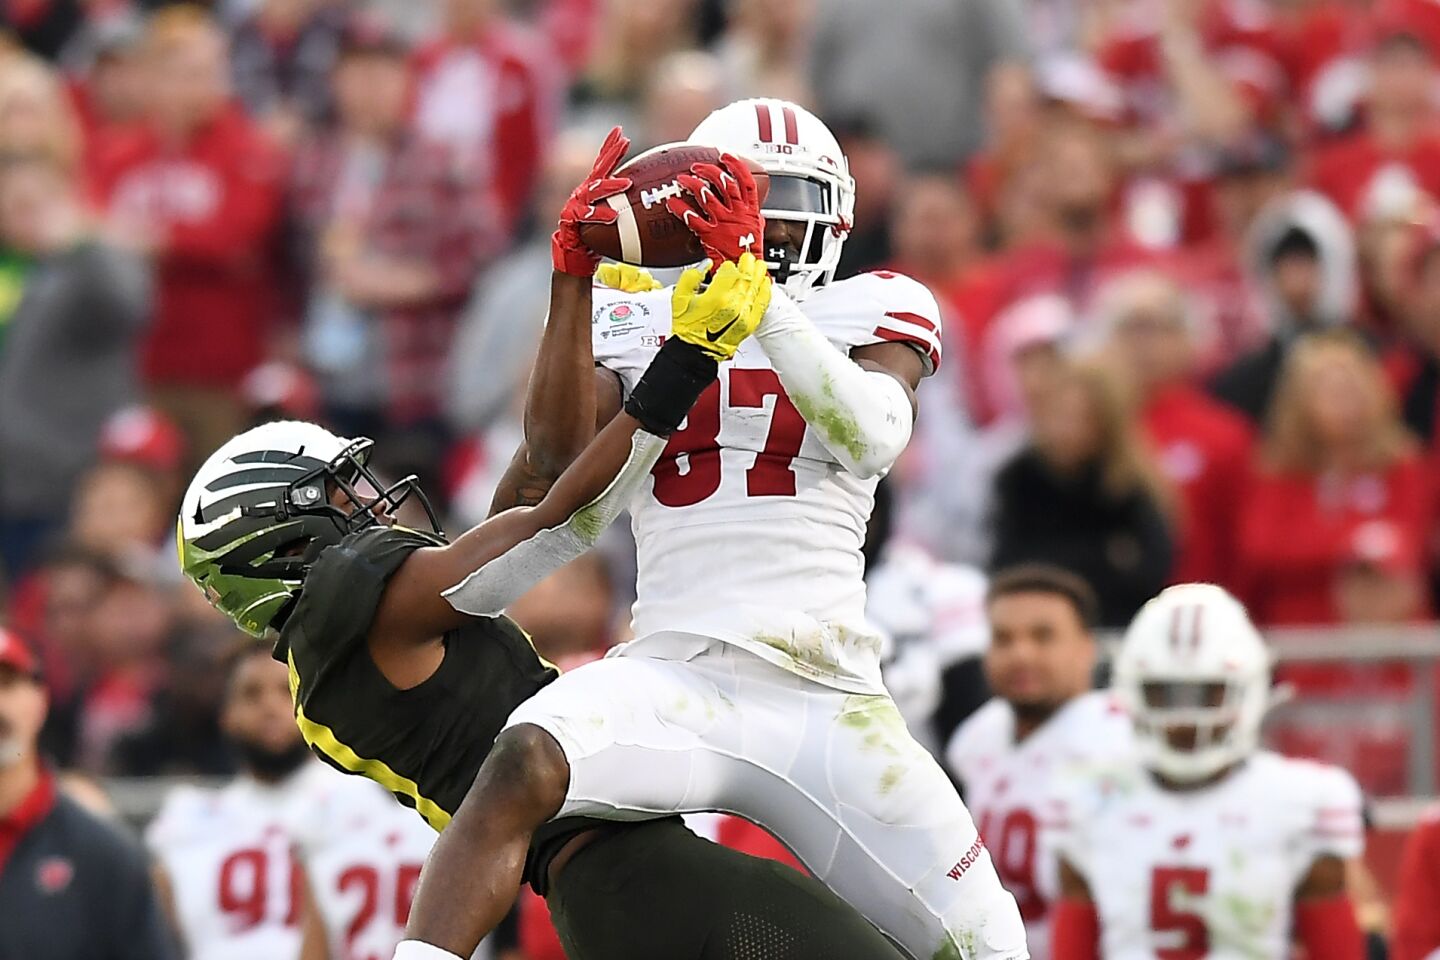 Wisconsin wide receiver Quintez Cephus makes a catch in front of Oregon safety Jevon Holland during the third quarter.